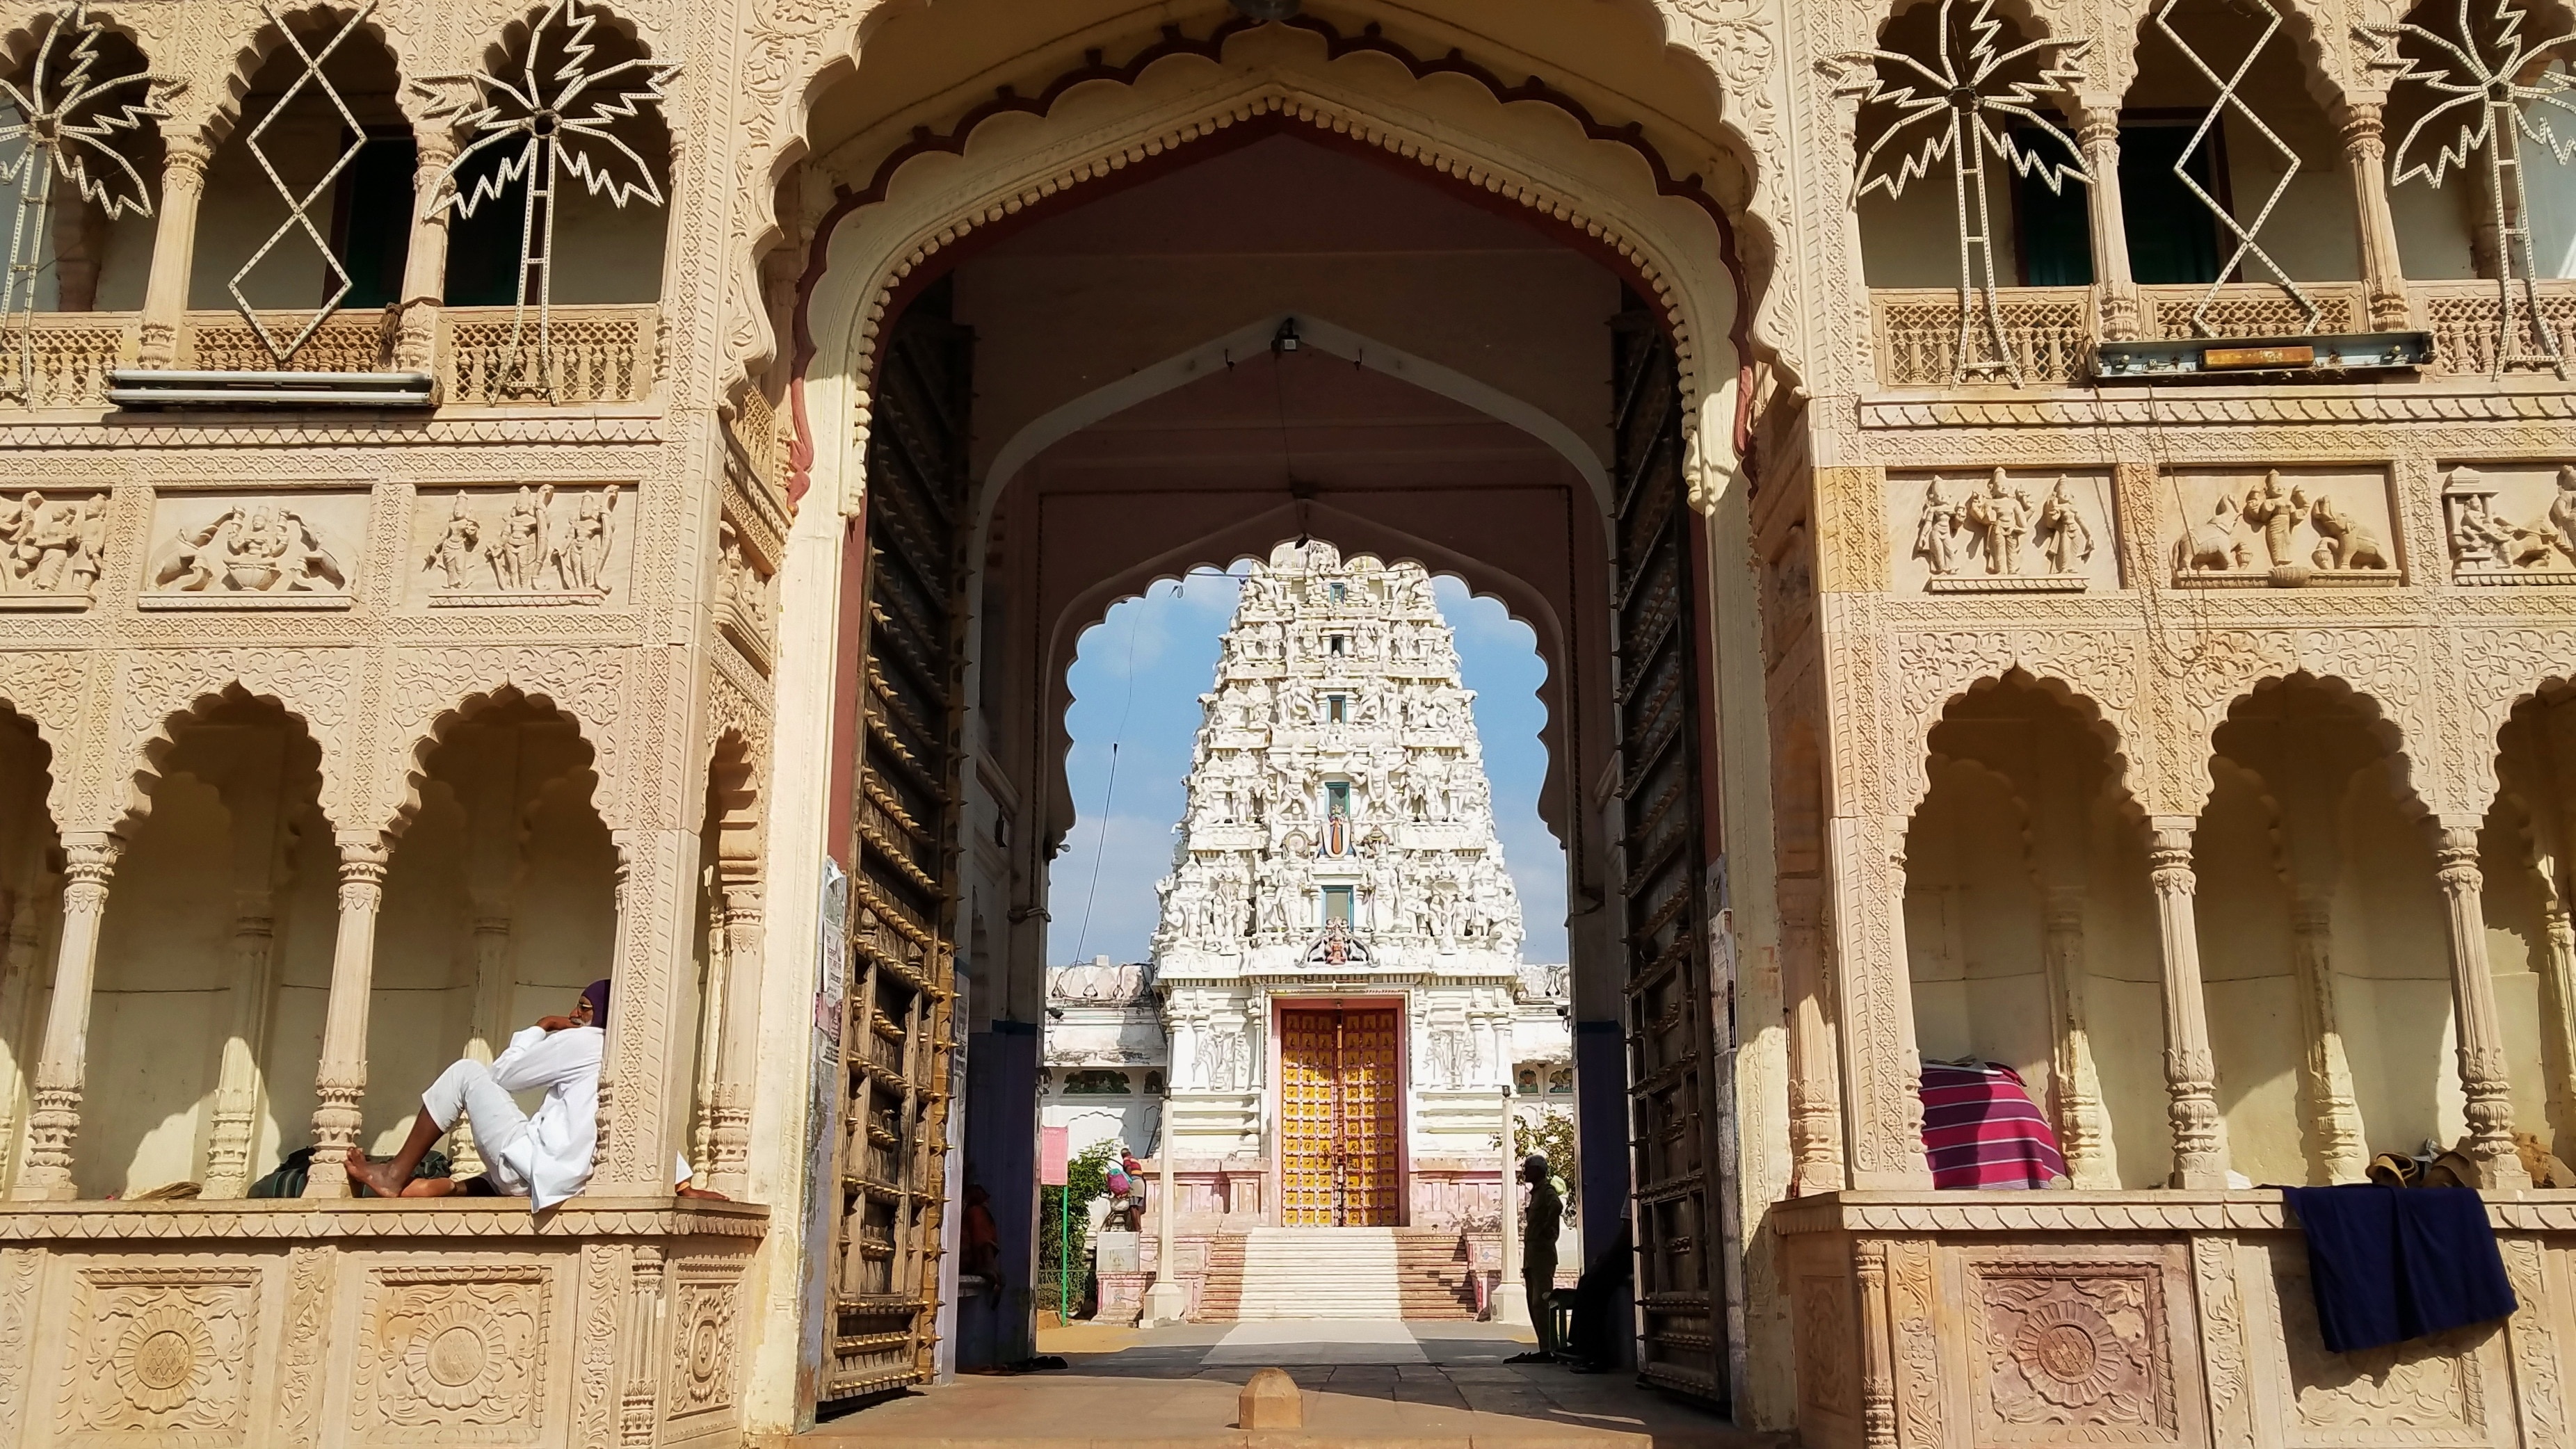 After a long ride from Jodhpur, I walked towards my guesthouse. This glorious temple and entrance tempted me to forget my fatigue, cross the street and explore. I loved the ancient craftsmanship and devotion that's so much a part of daily life here. #OnTheRoad